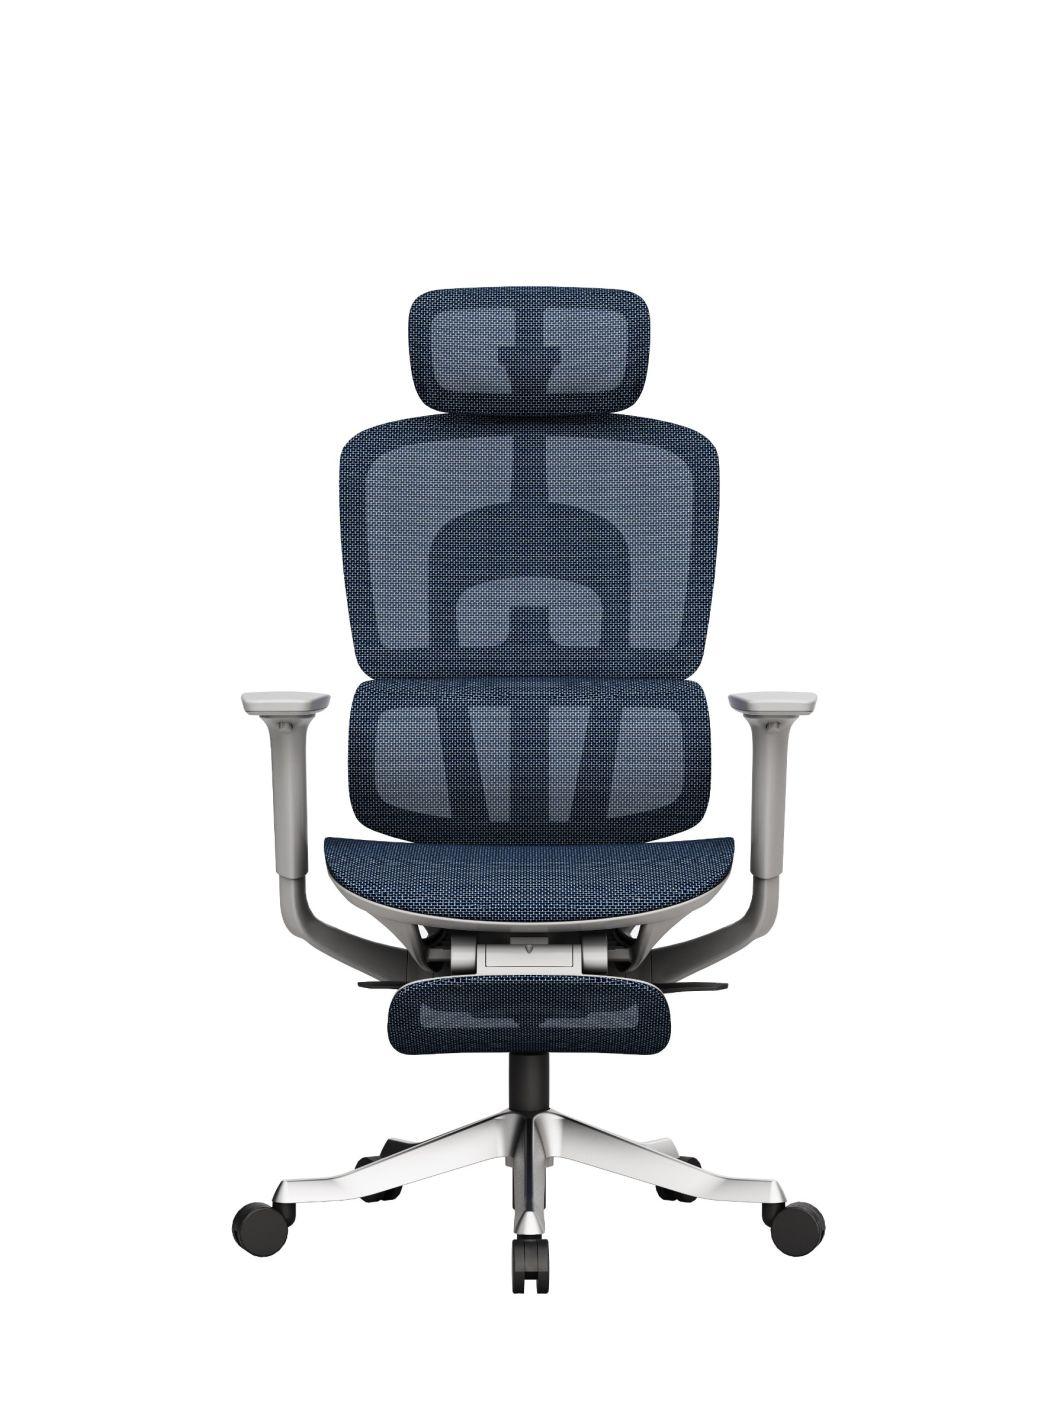 New Design Factory Price Office Chair with Foot Support